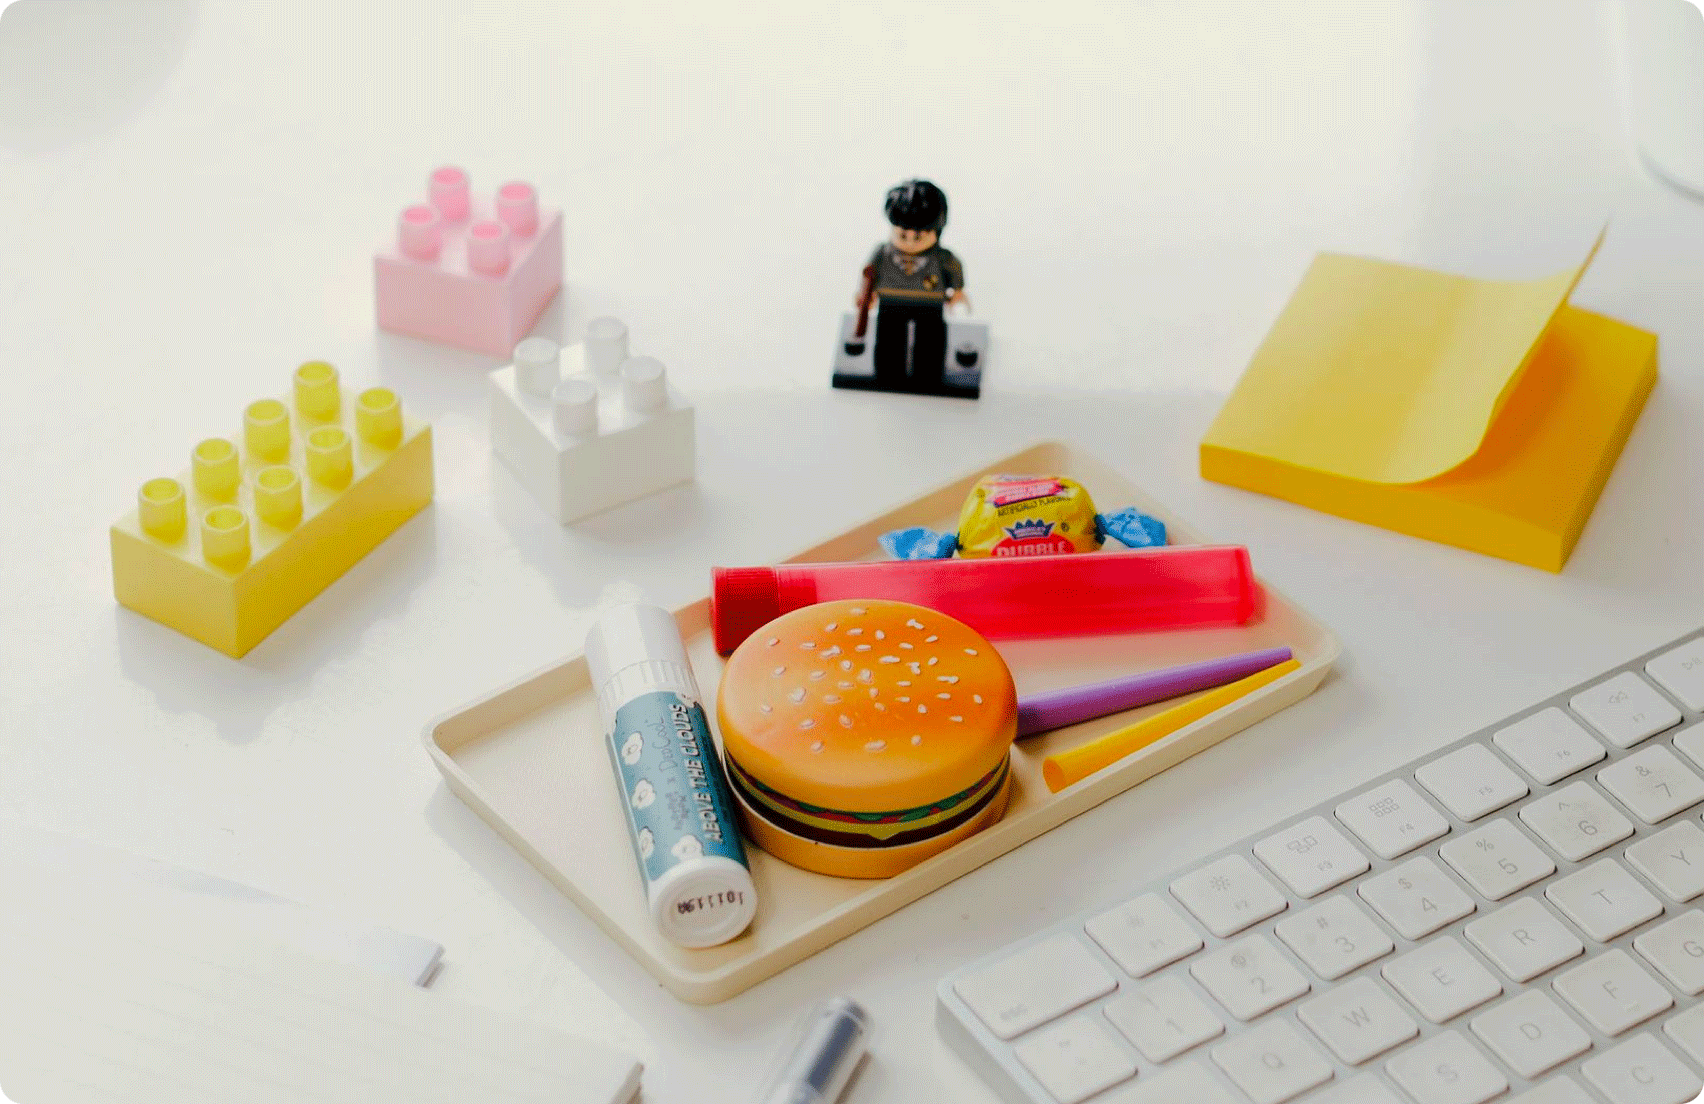 WFH Set Up — The Basic Tray, The Hamburger Grinder, DedCool Chapstick, Joint Cones, Doob Tubes, Muji pen, stickies, Double Bubble, and yes, a mini LEGO Harry Potter.